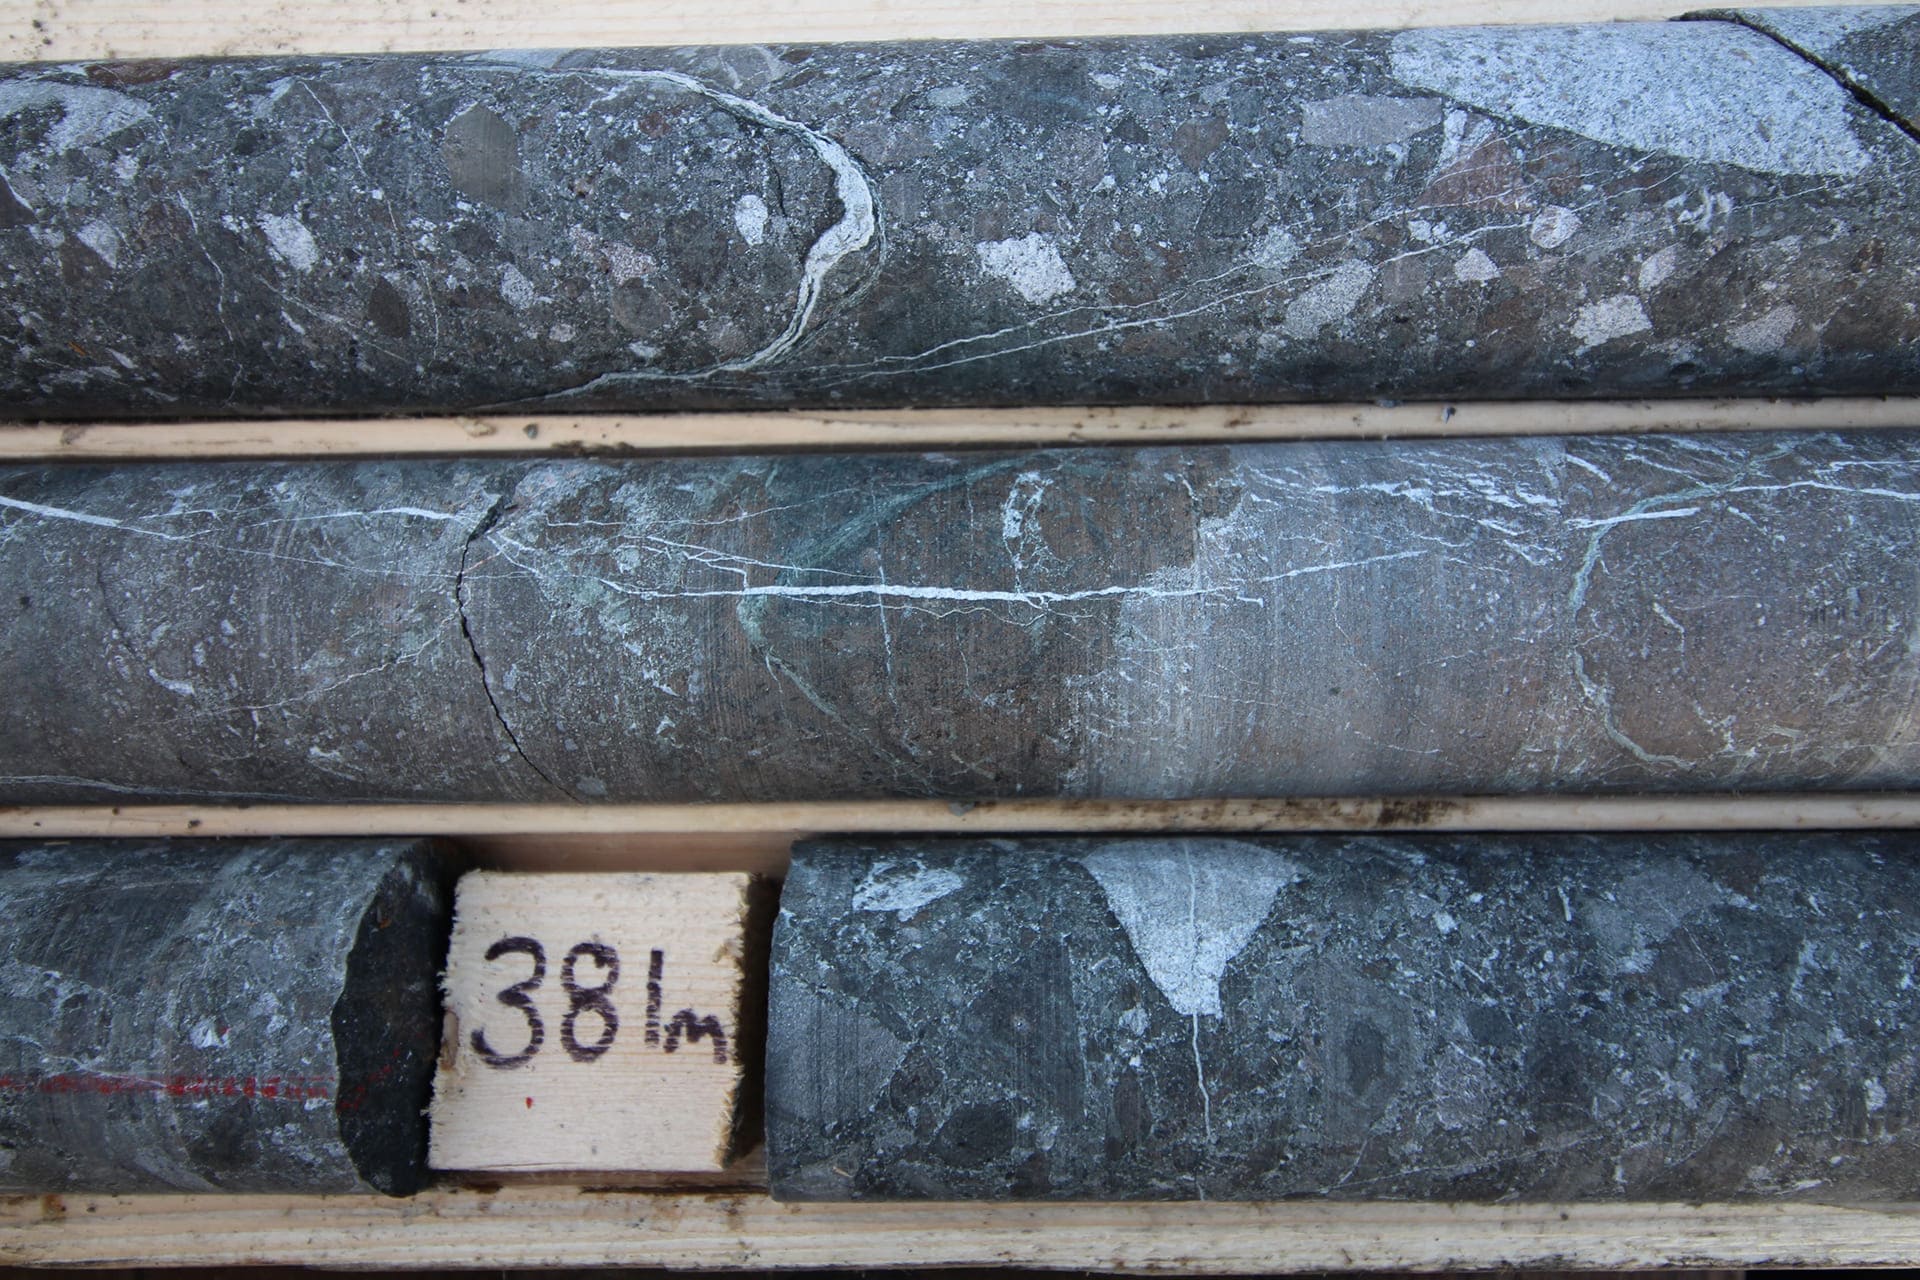 Hydrothermal breccia, fluorite and high temperature veins in drill core, Oct. 2020